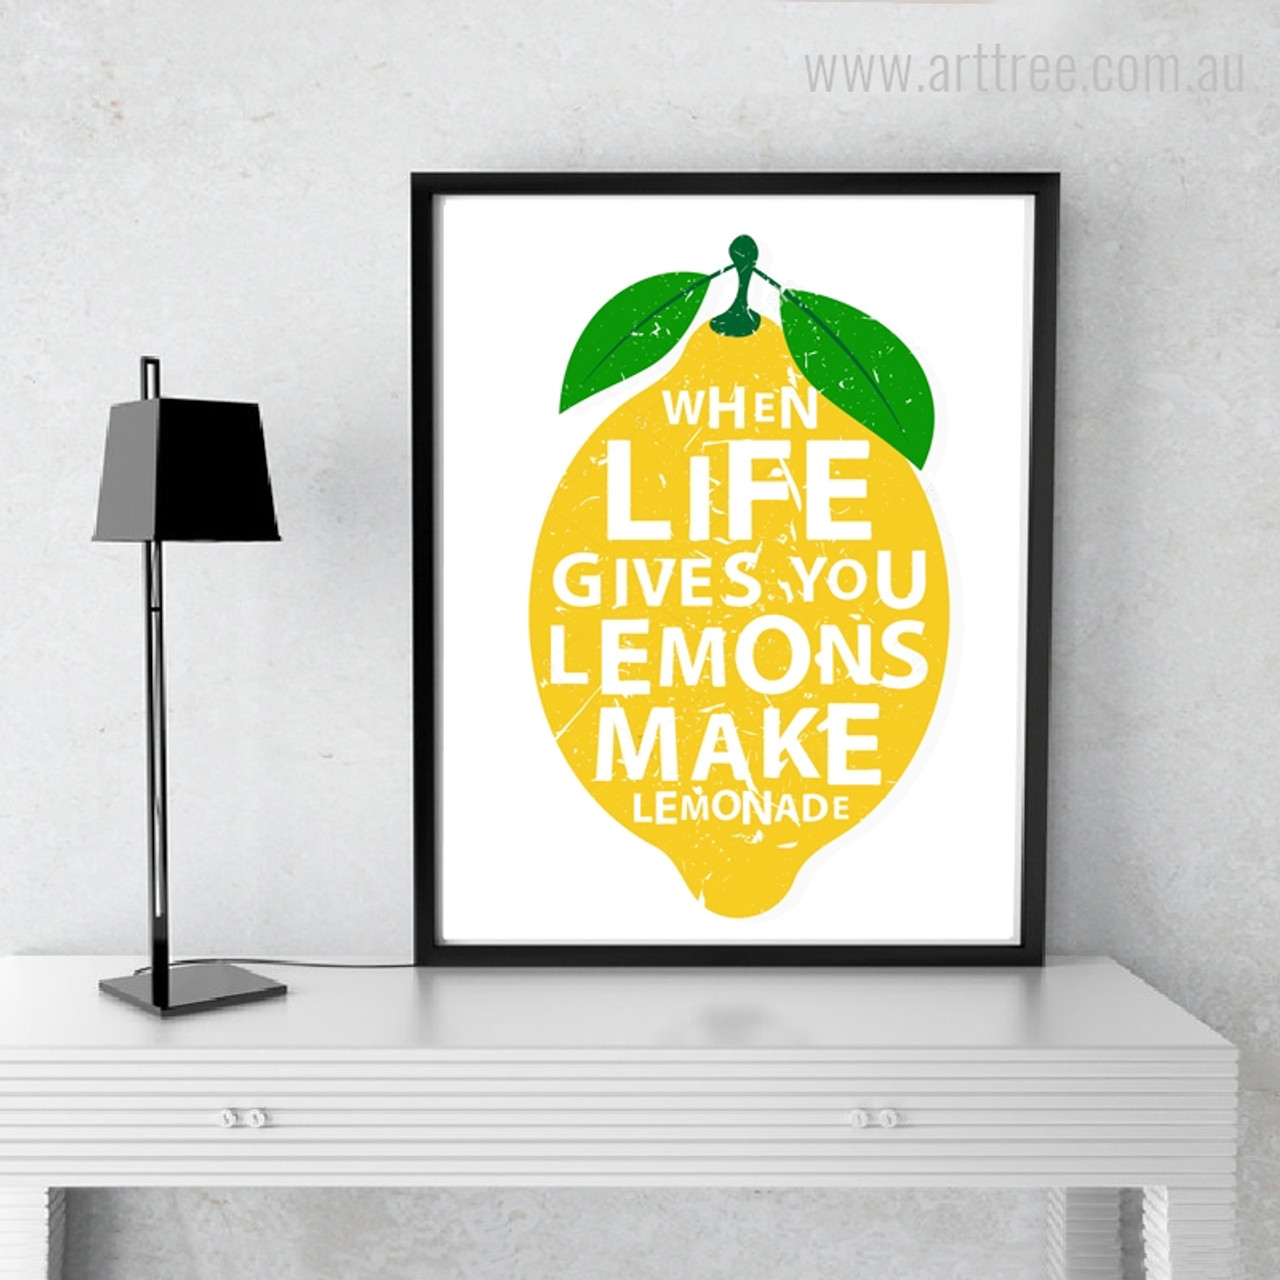 Most Inspiring Office Wall art for your Workspace - arttree.com.au